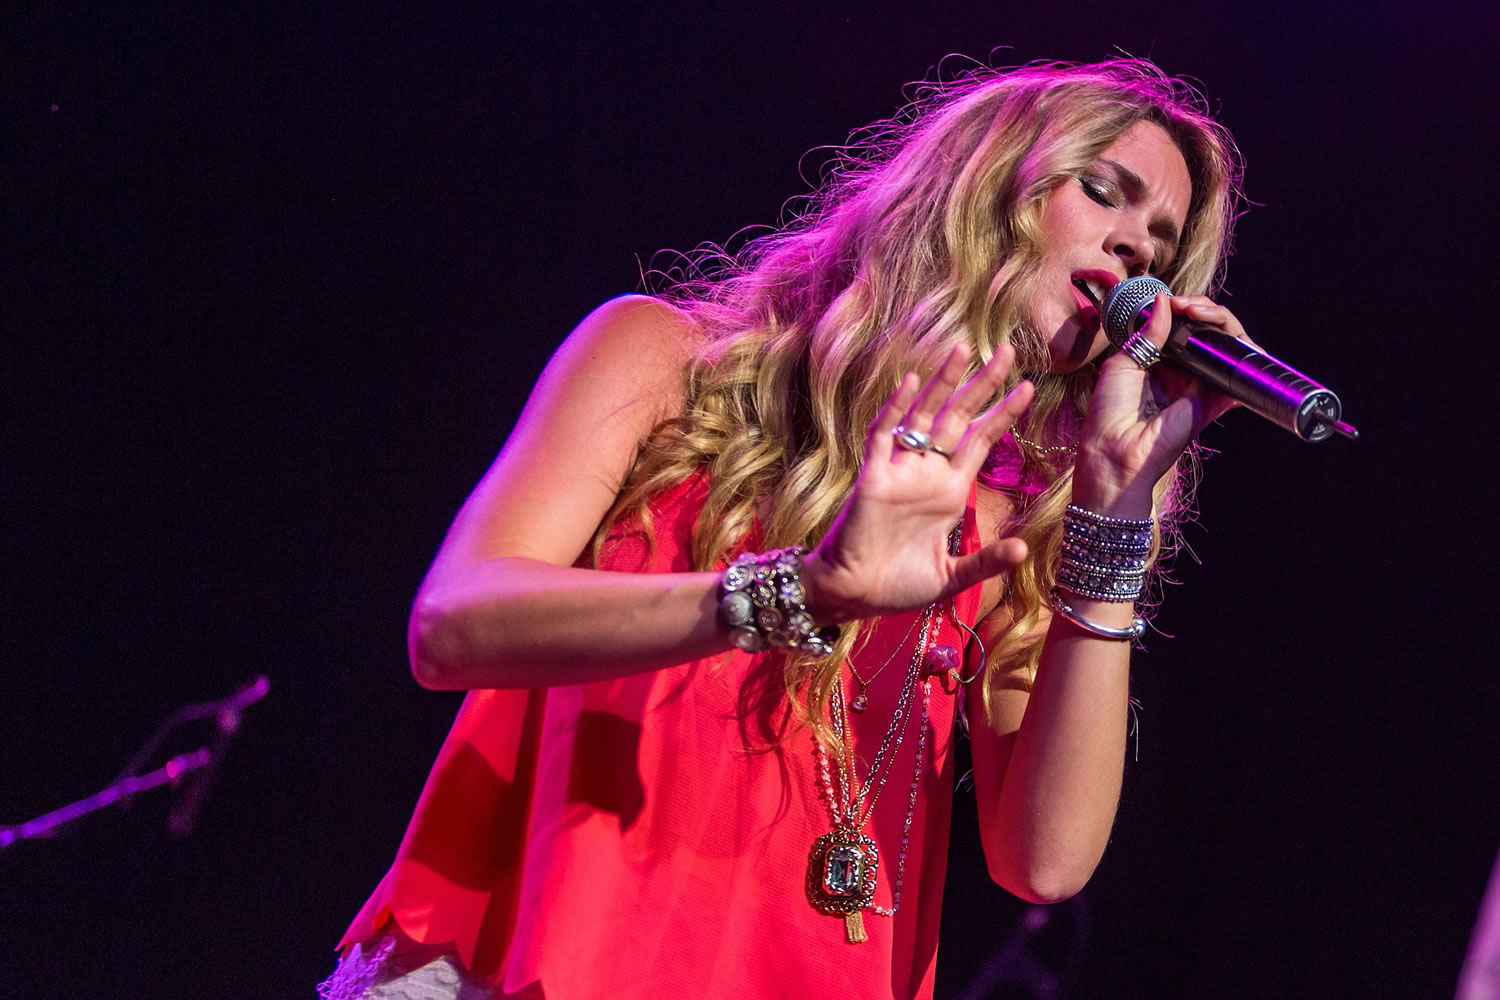 Joss Stone performs on stage July 23 at The Fonda Theatre in Los Angeles.